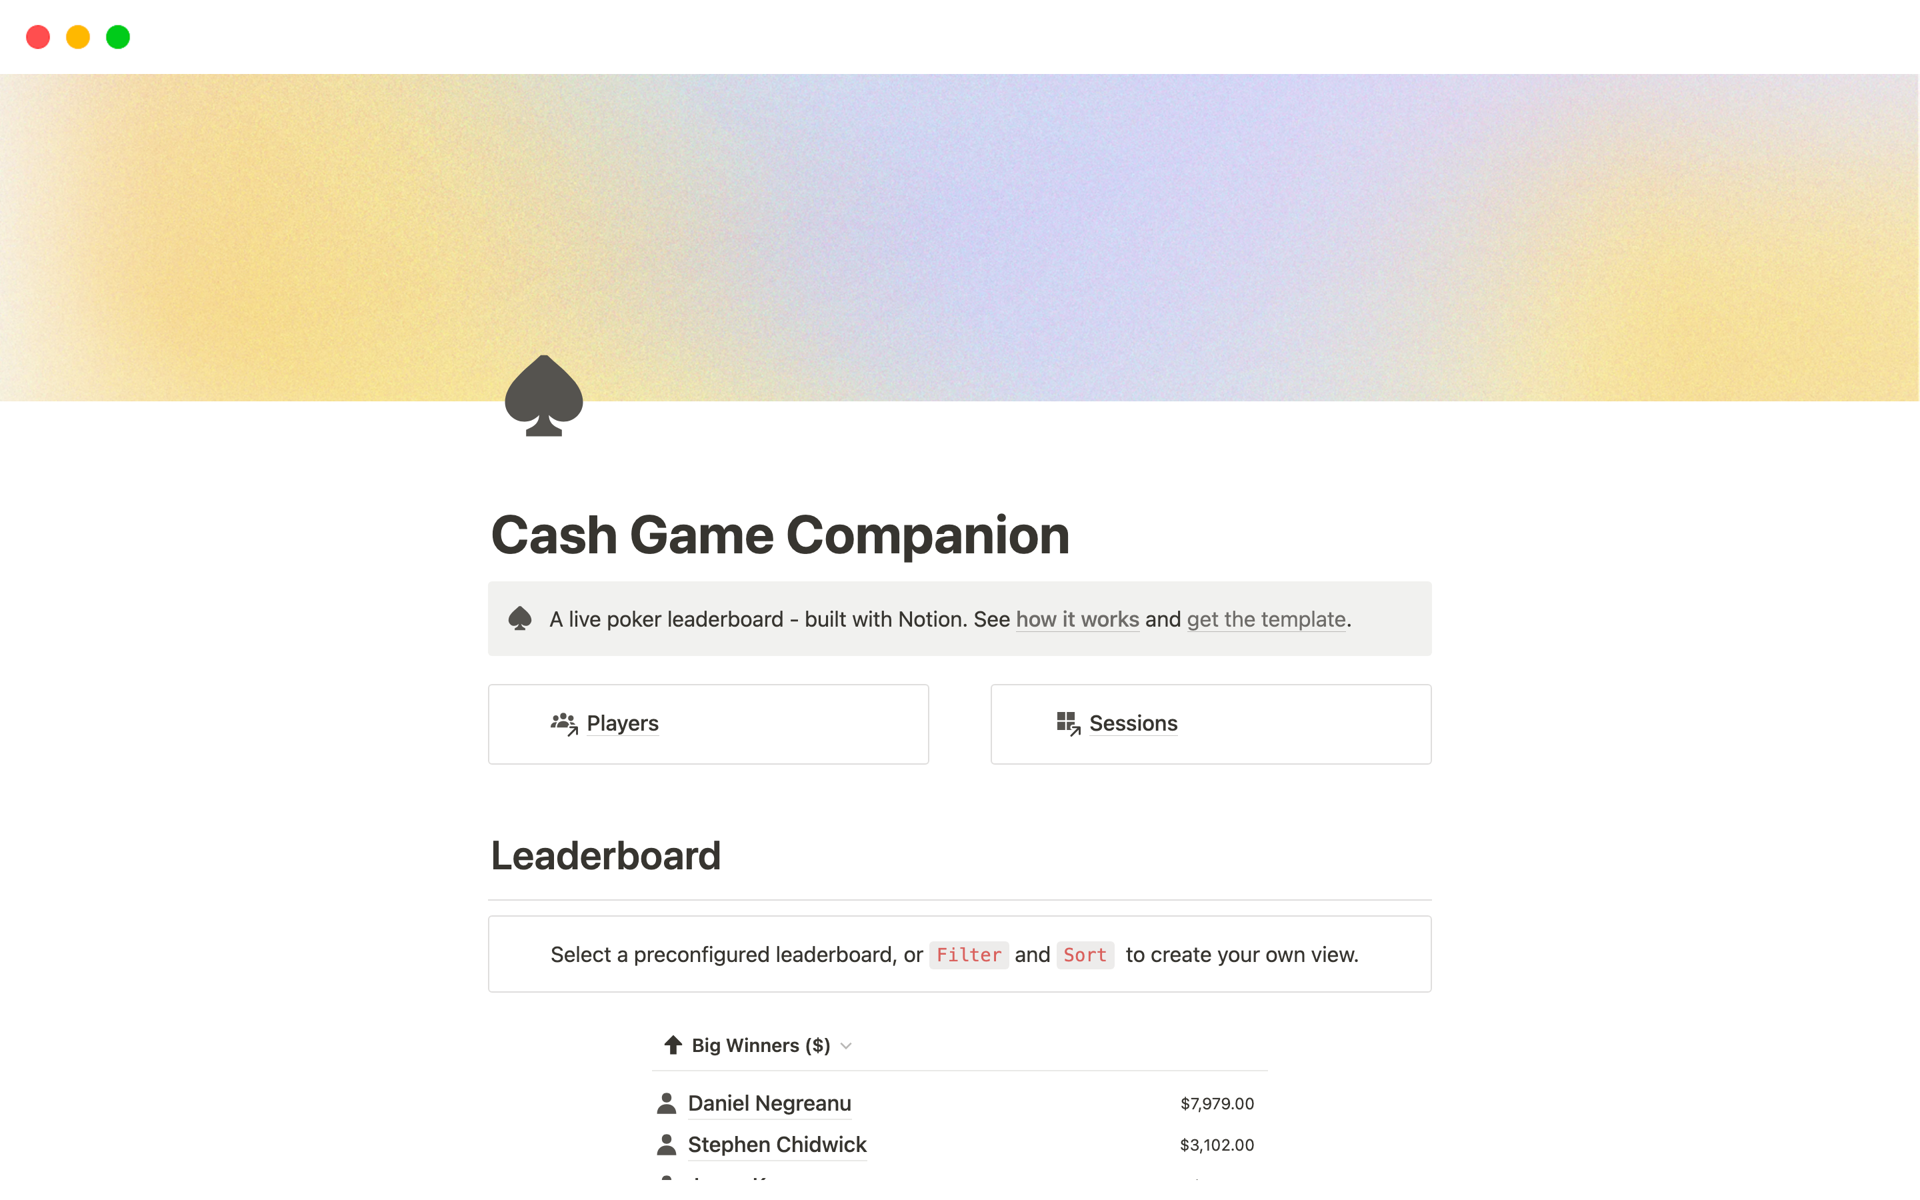 Cash Game Companion is a live poker leaderboard built in Notion.